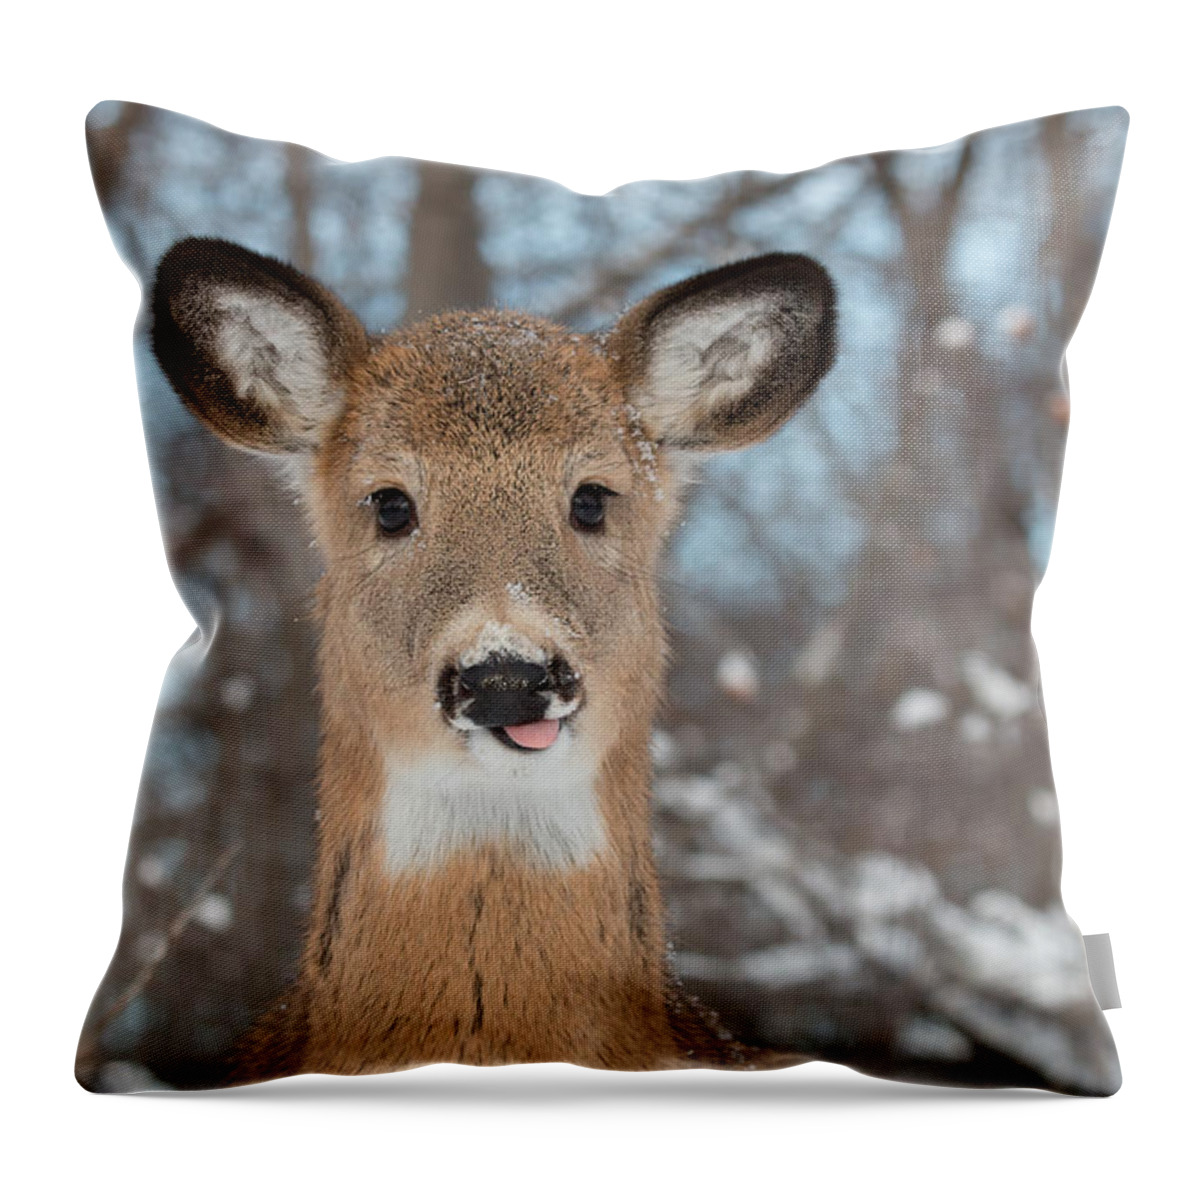 Deer Throw Pillow featuring the photograph The Young One by Celine Pollard